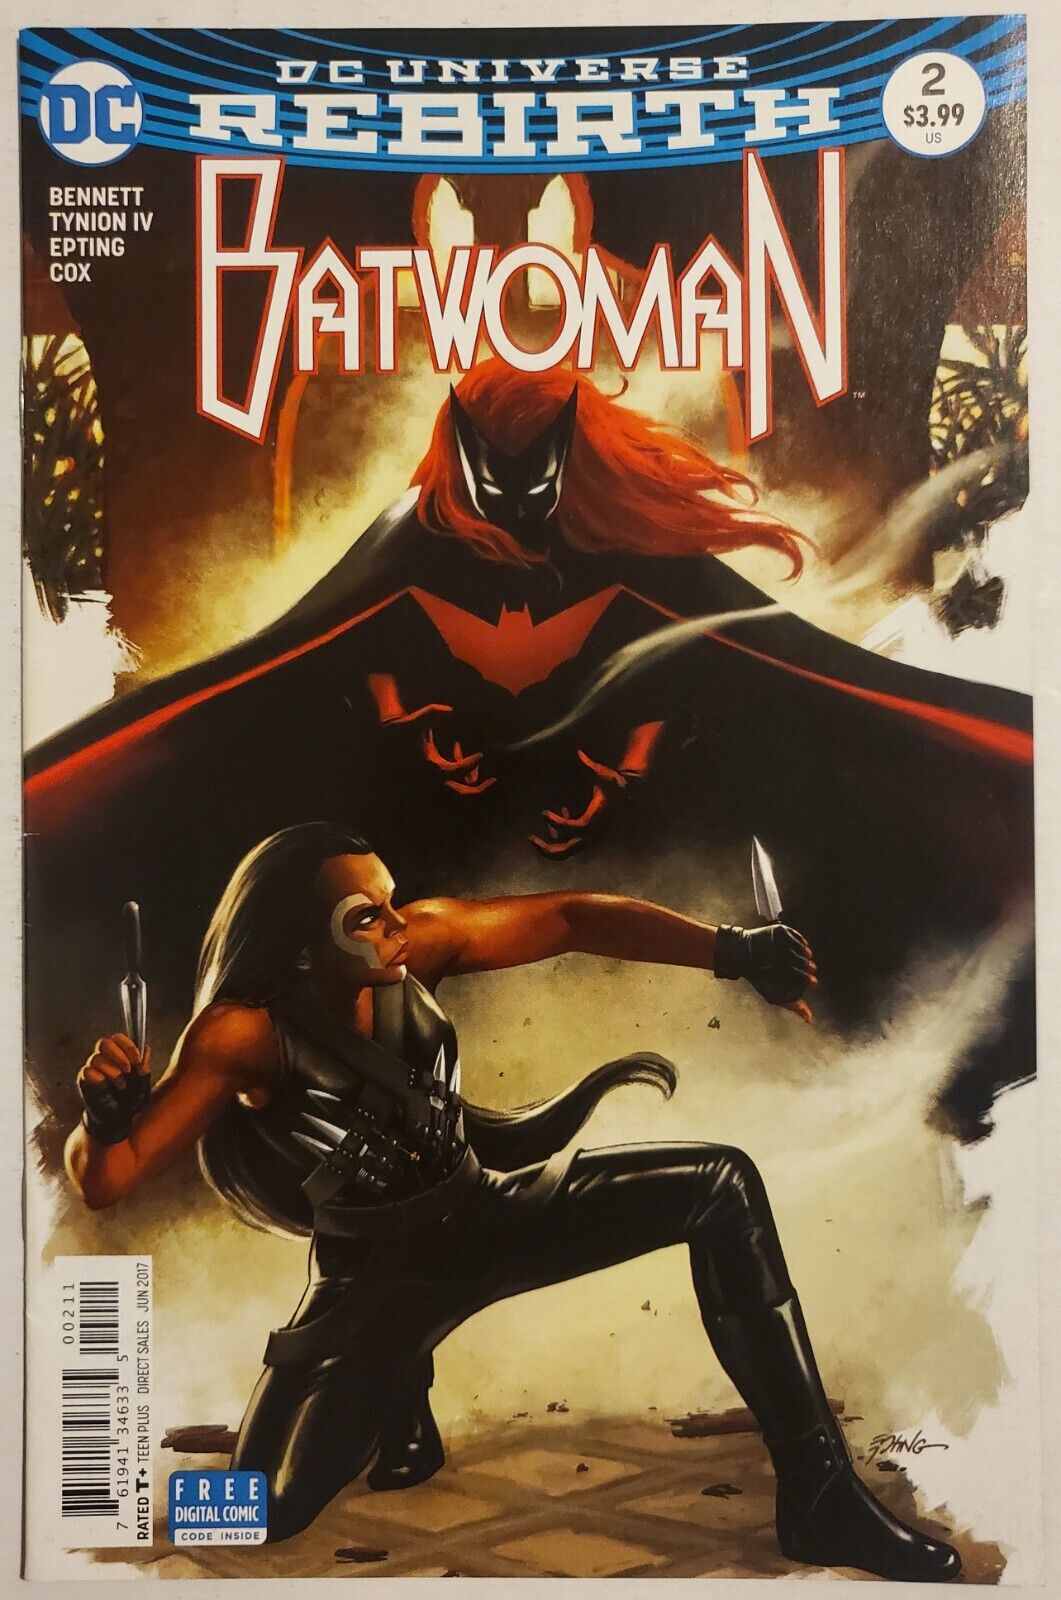 BATWOMAN #2 FIRST PRINTING 2017 BIG AUCTION GOING ON NOW CHECKOUT THE STORE